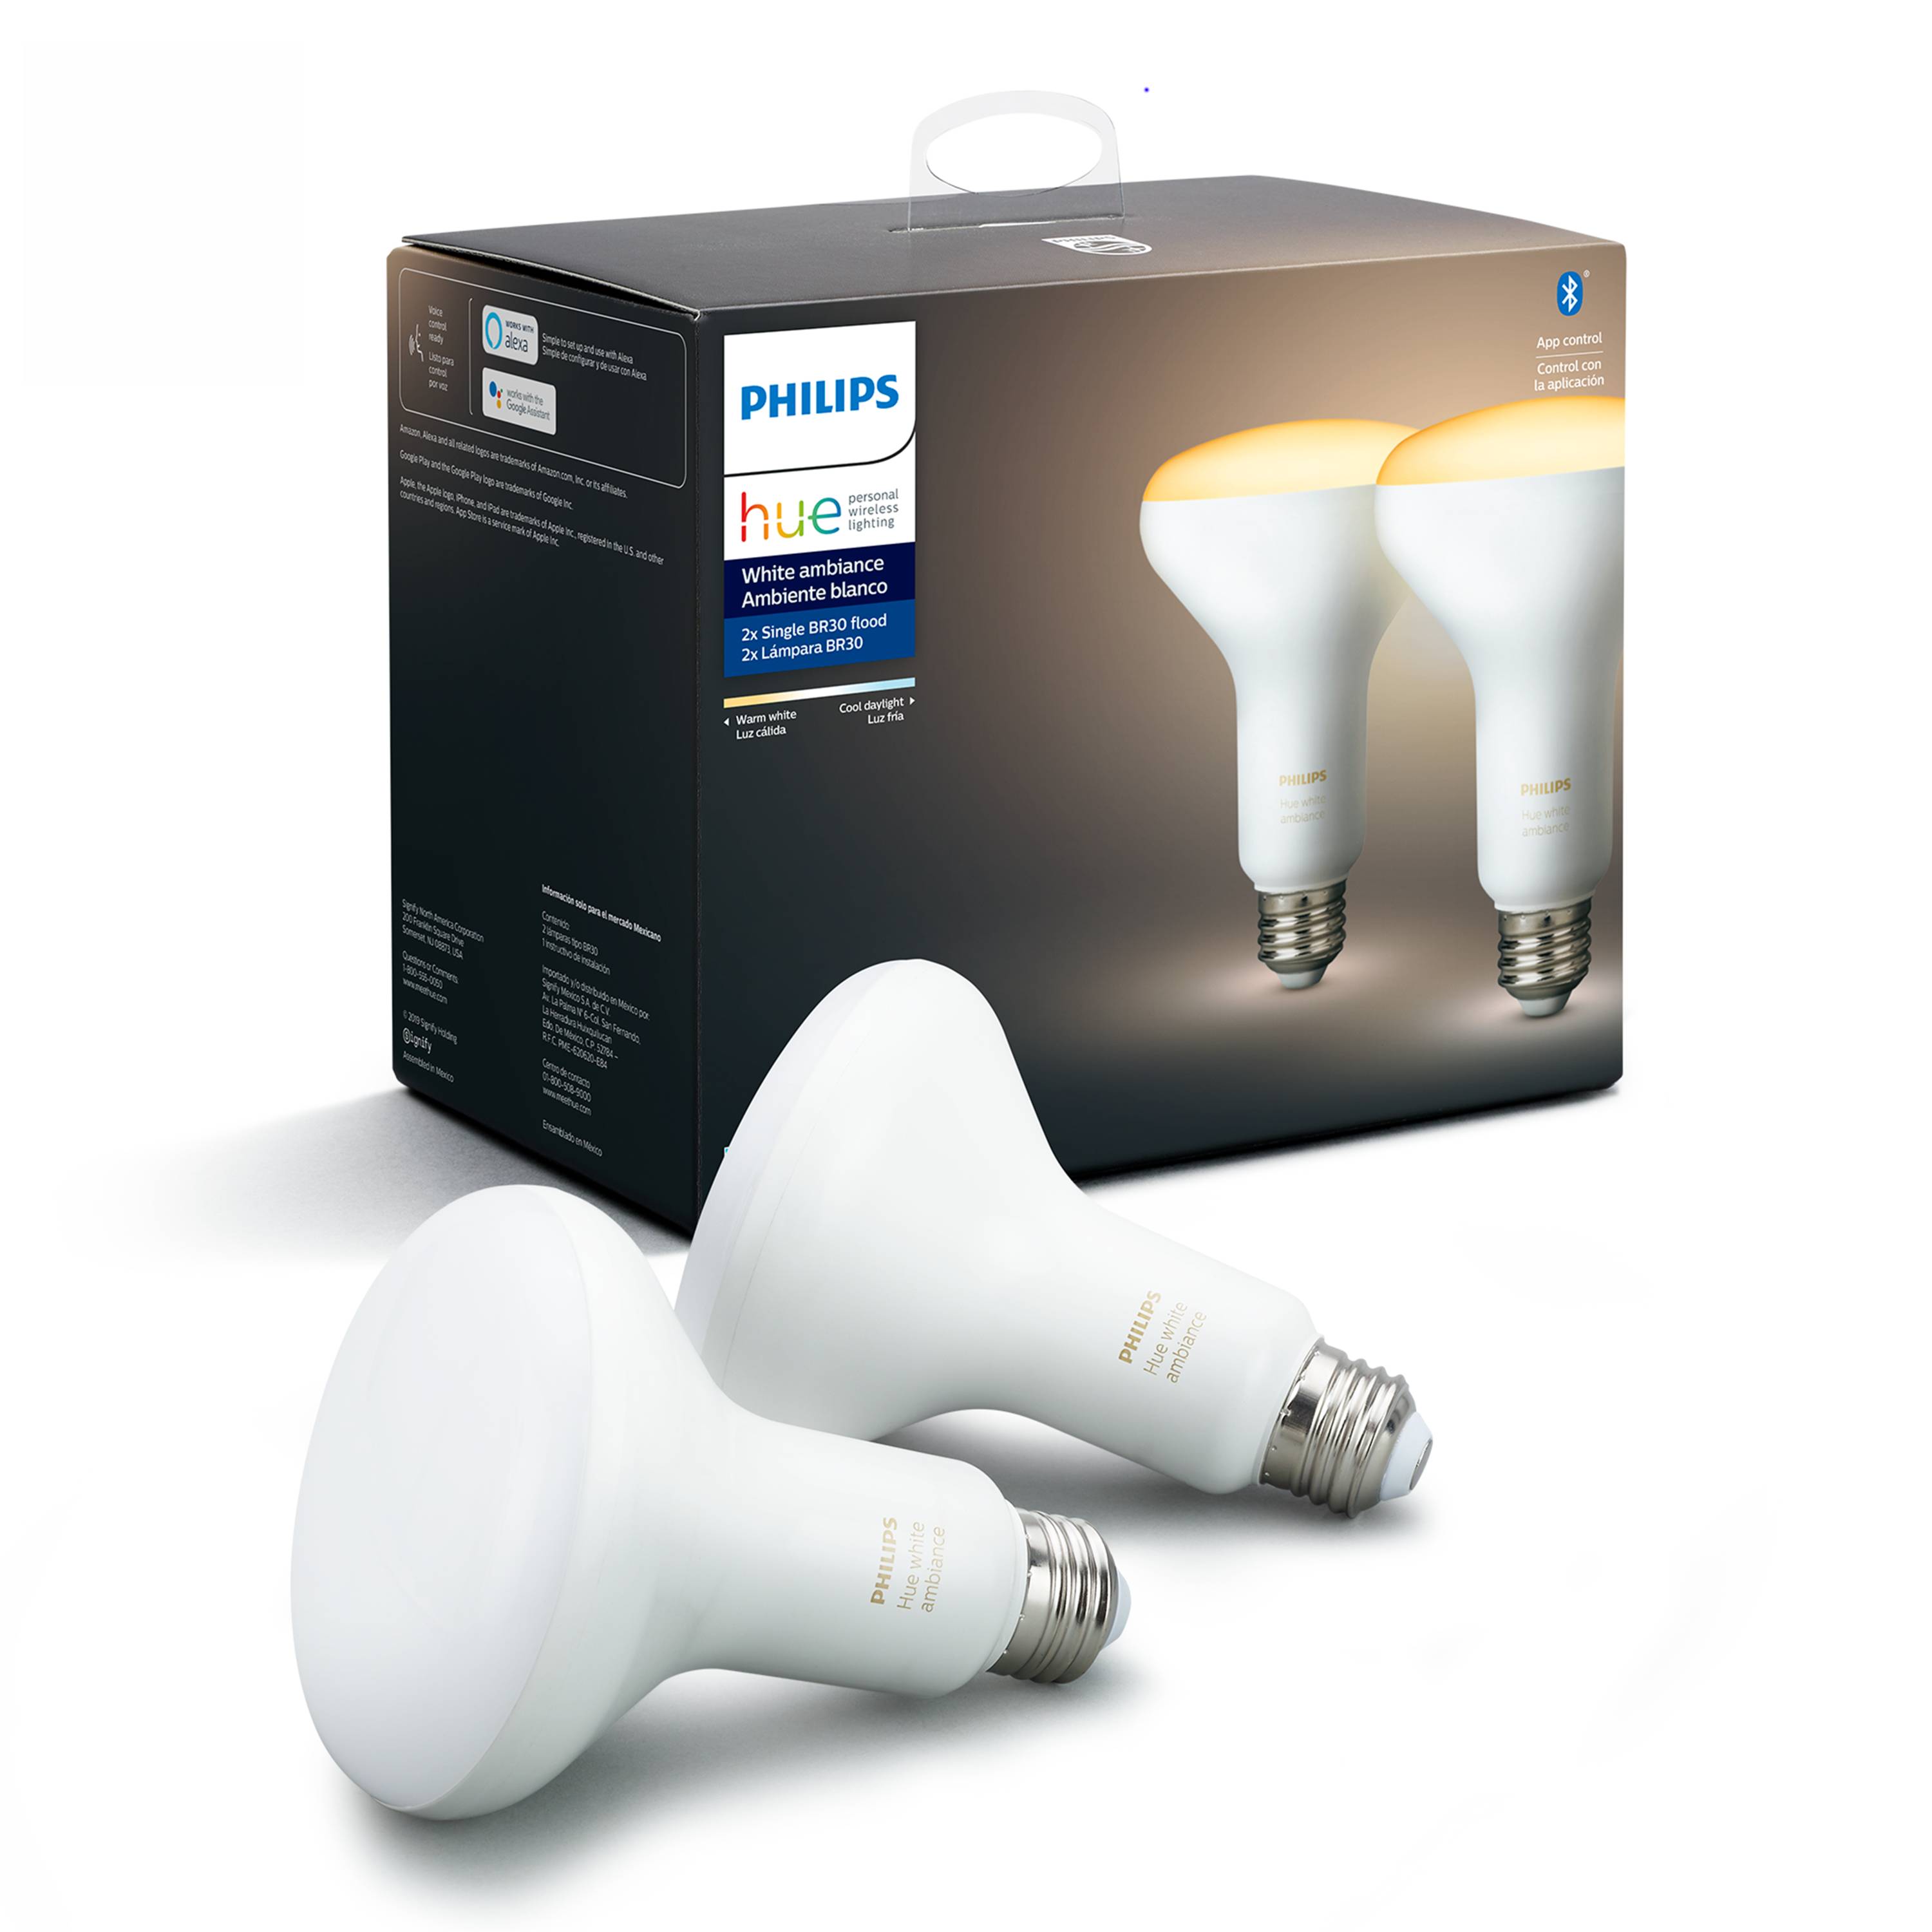 Philips Hue 65-Watt EQ BR30 Tunable White Light (2-Pack) at Lowes.com